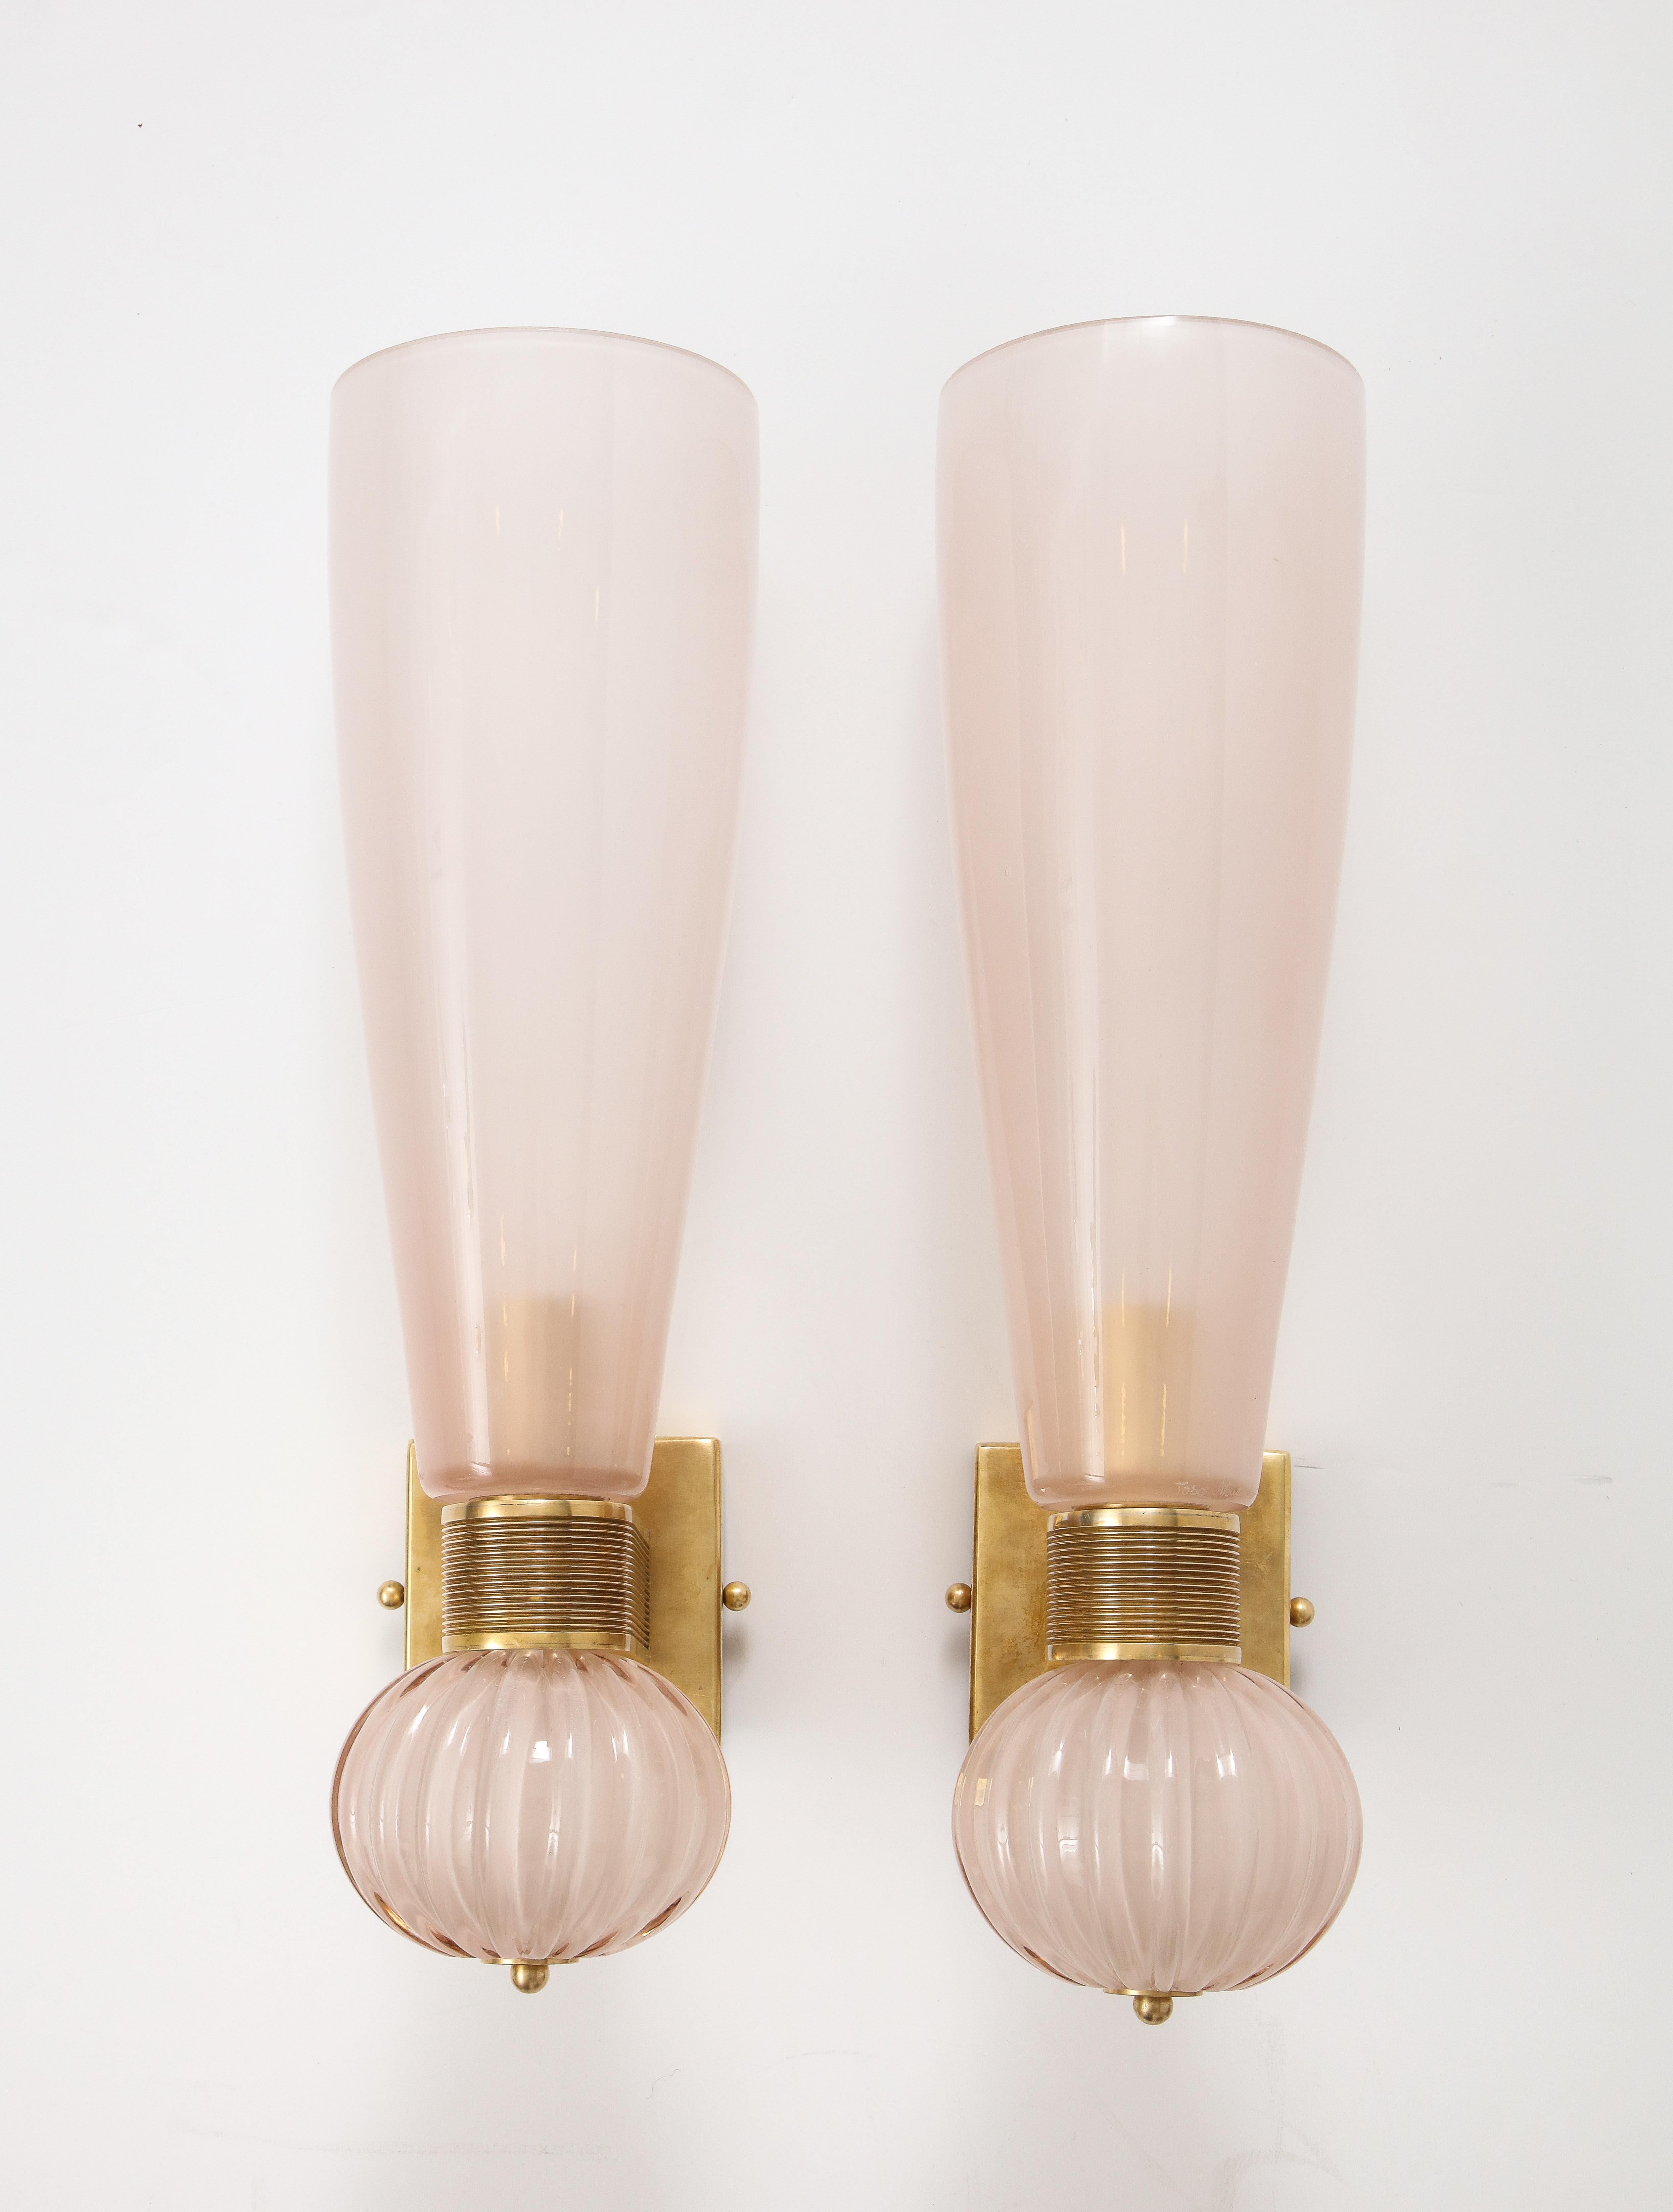 Barovier & Toso Murano pair of pink hand blown glass and brass wall sconces, Italy 1940's.

This stunning pair of elegant Murano pink hand blown glass wall sconces were realized by the iconic atelier of Barovier e Toso in Murano, Italy, circa late